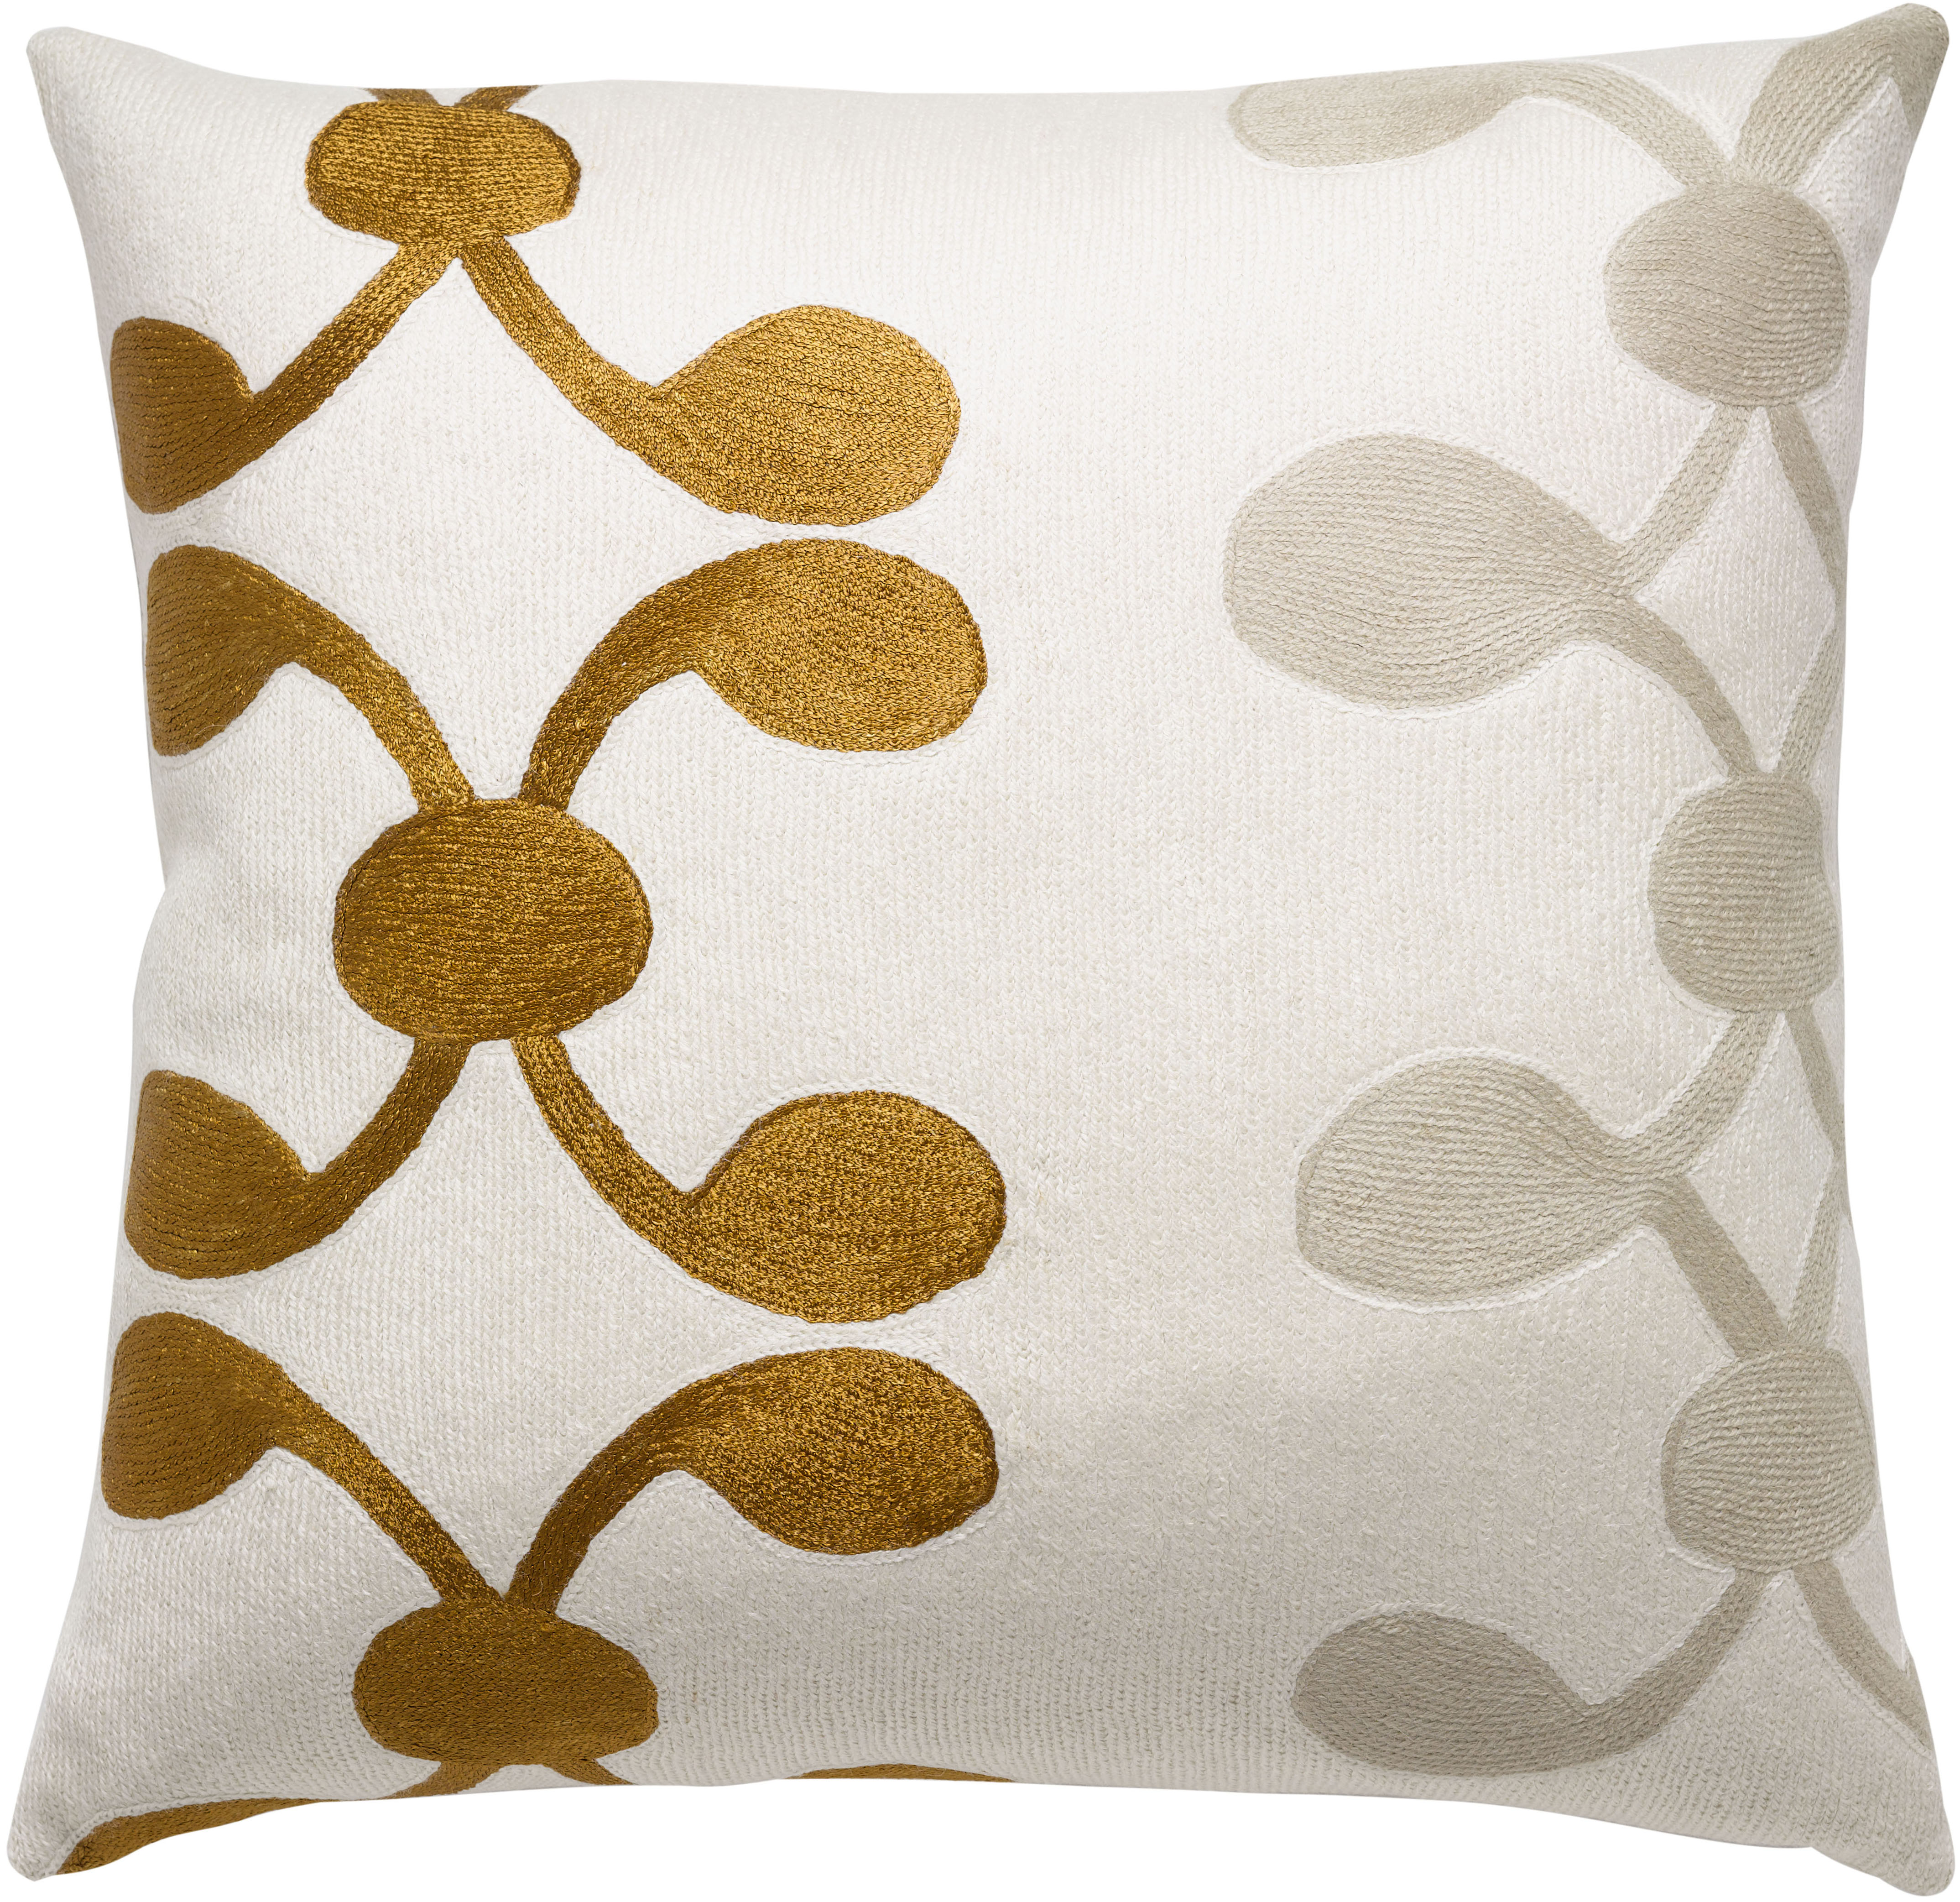 Hand-Embroidered Chain Stitch Pillows: :: Ross 18x18 Textiles :: Judy Celine